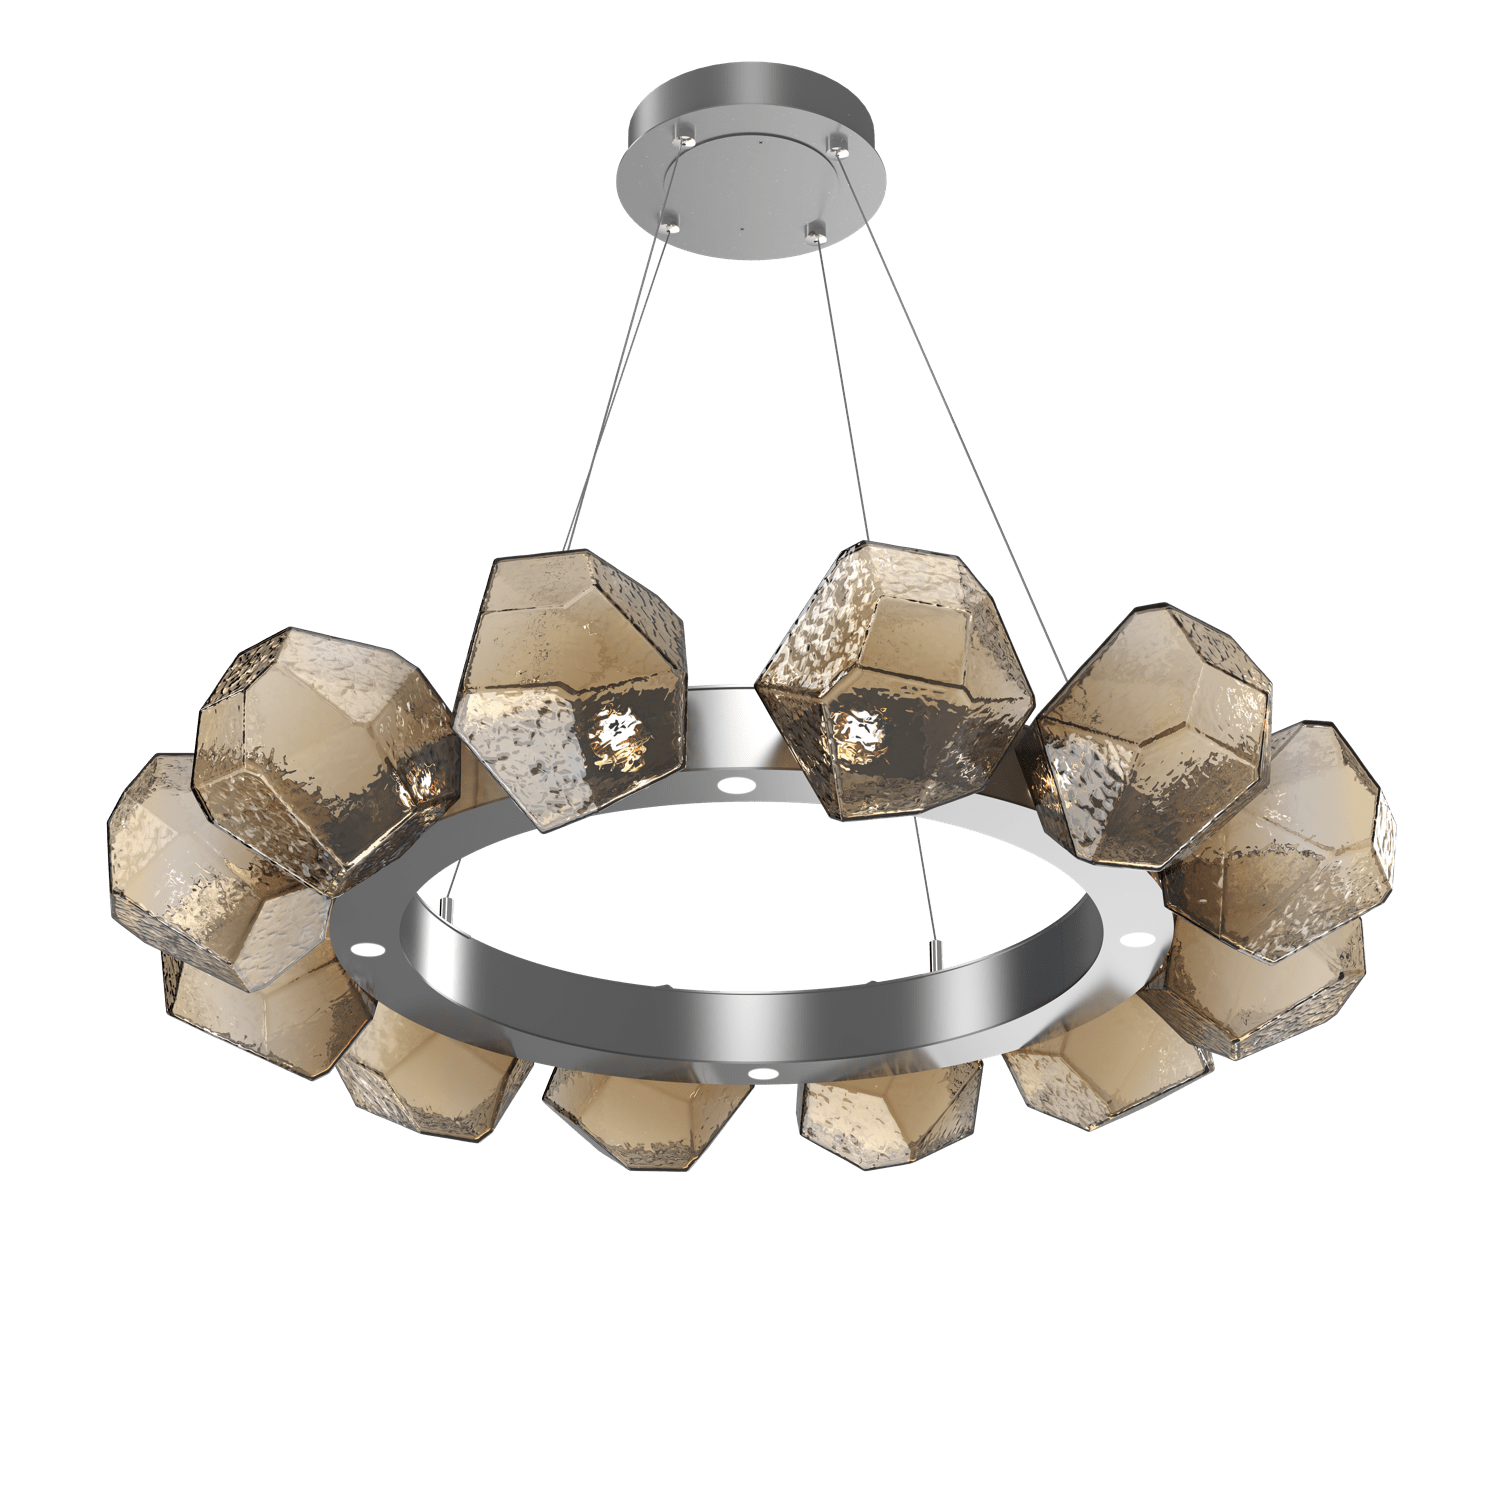 CHB0039-36-CS-B-Hammerton-Studio-Gem-36-inch-radial-ring-chandelier-with-classic-silver-finish-and-bronze-blown-glass-shades-and-LED-lamping